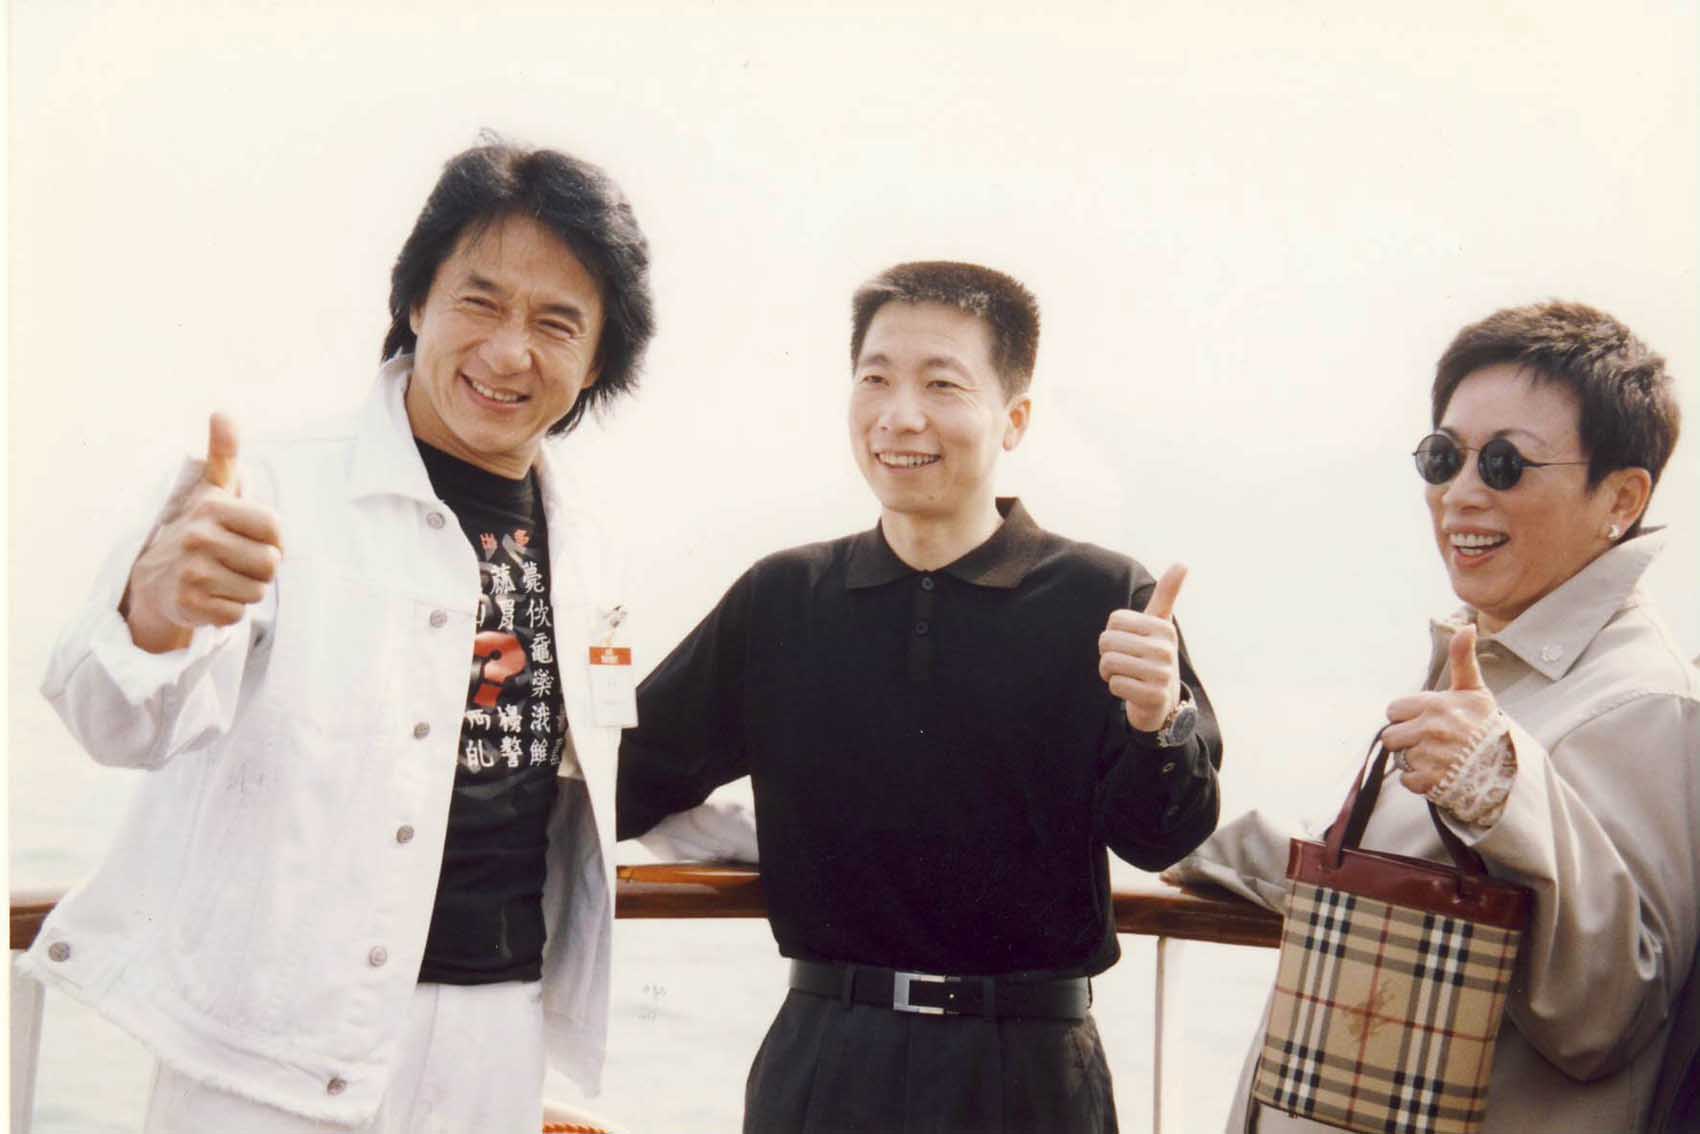 Mr. Yang Liwei (the first Chinese astronaut) and Mr. Jackie Chan (Hong Kong artist) visited in November 2003